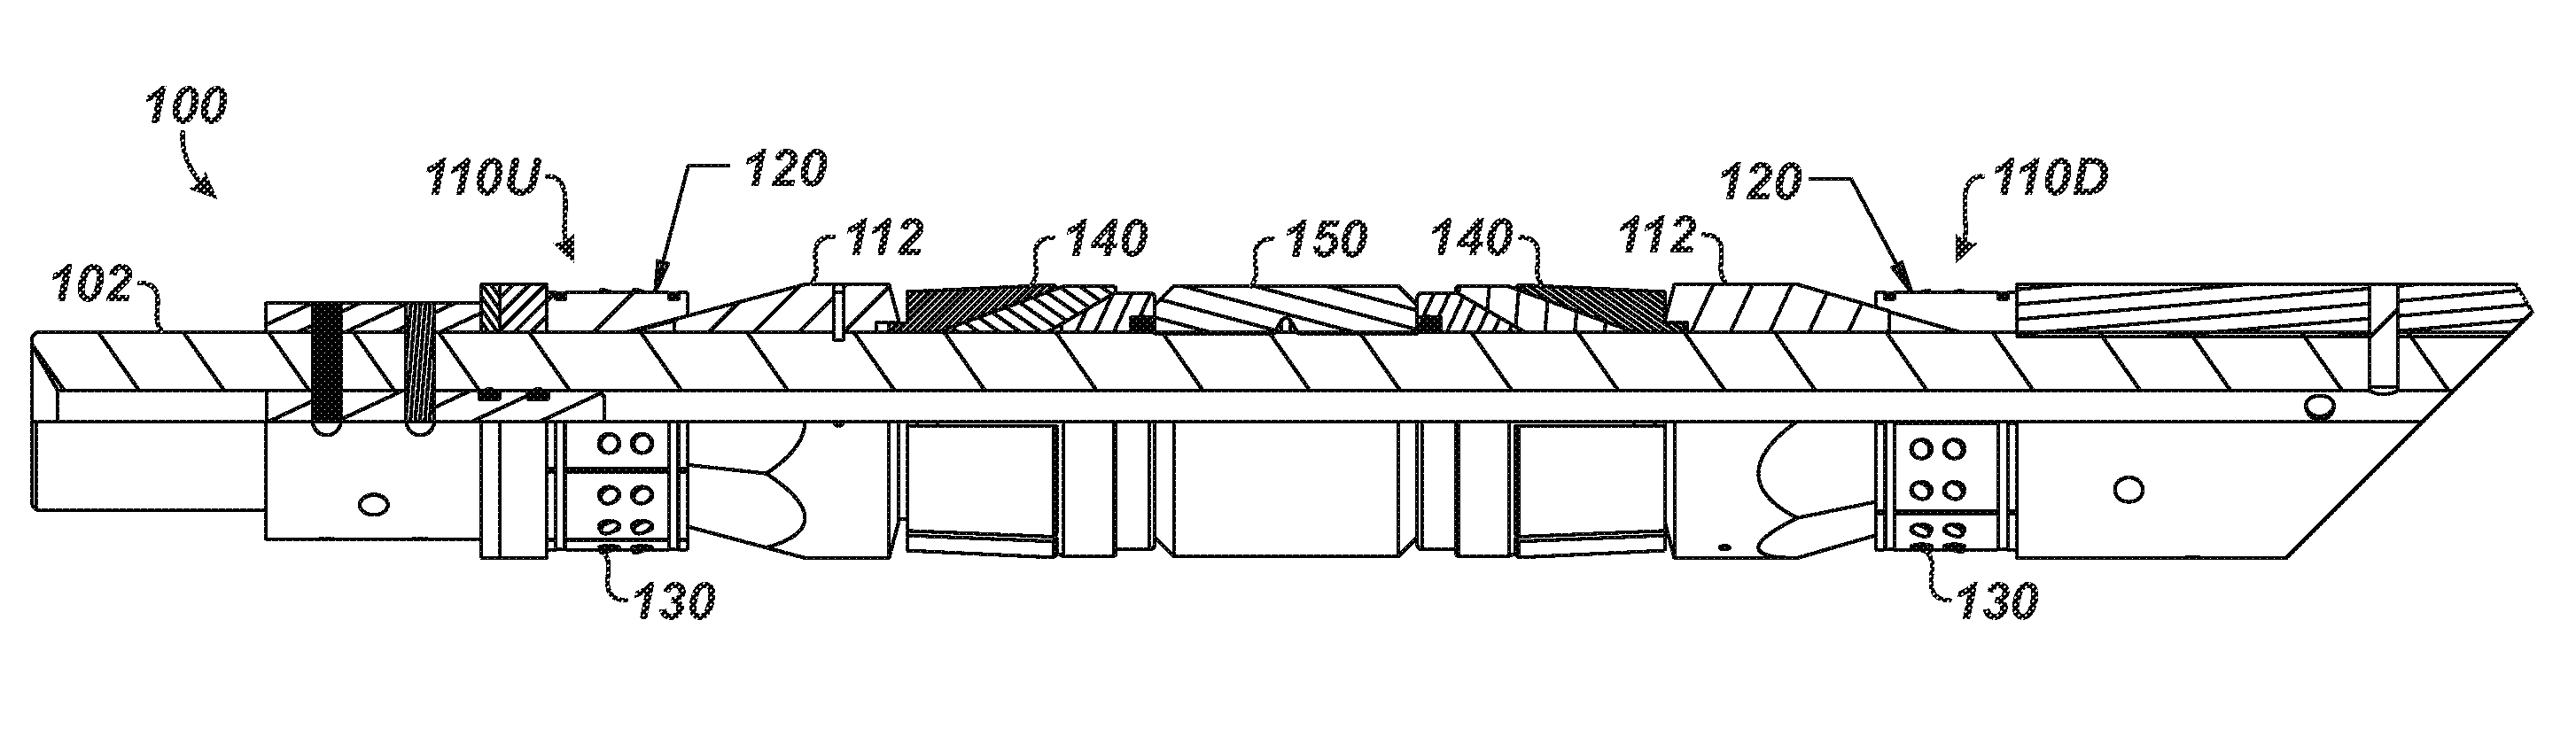 Downhole tool having slip inserts composed of different materials